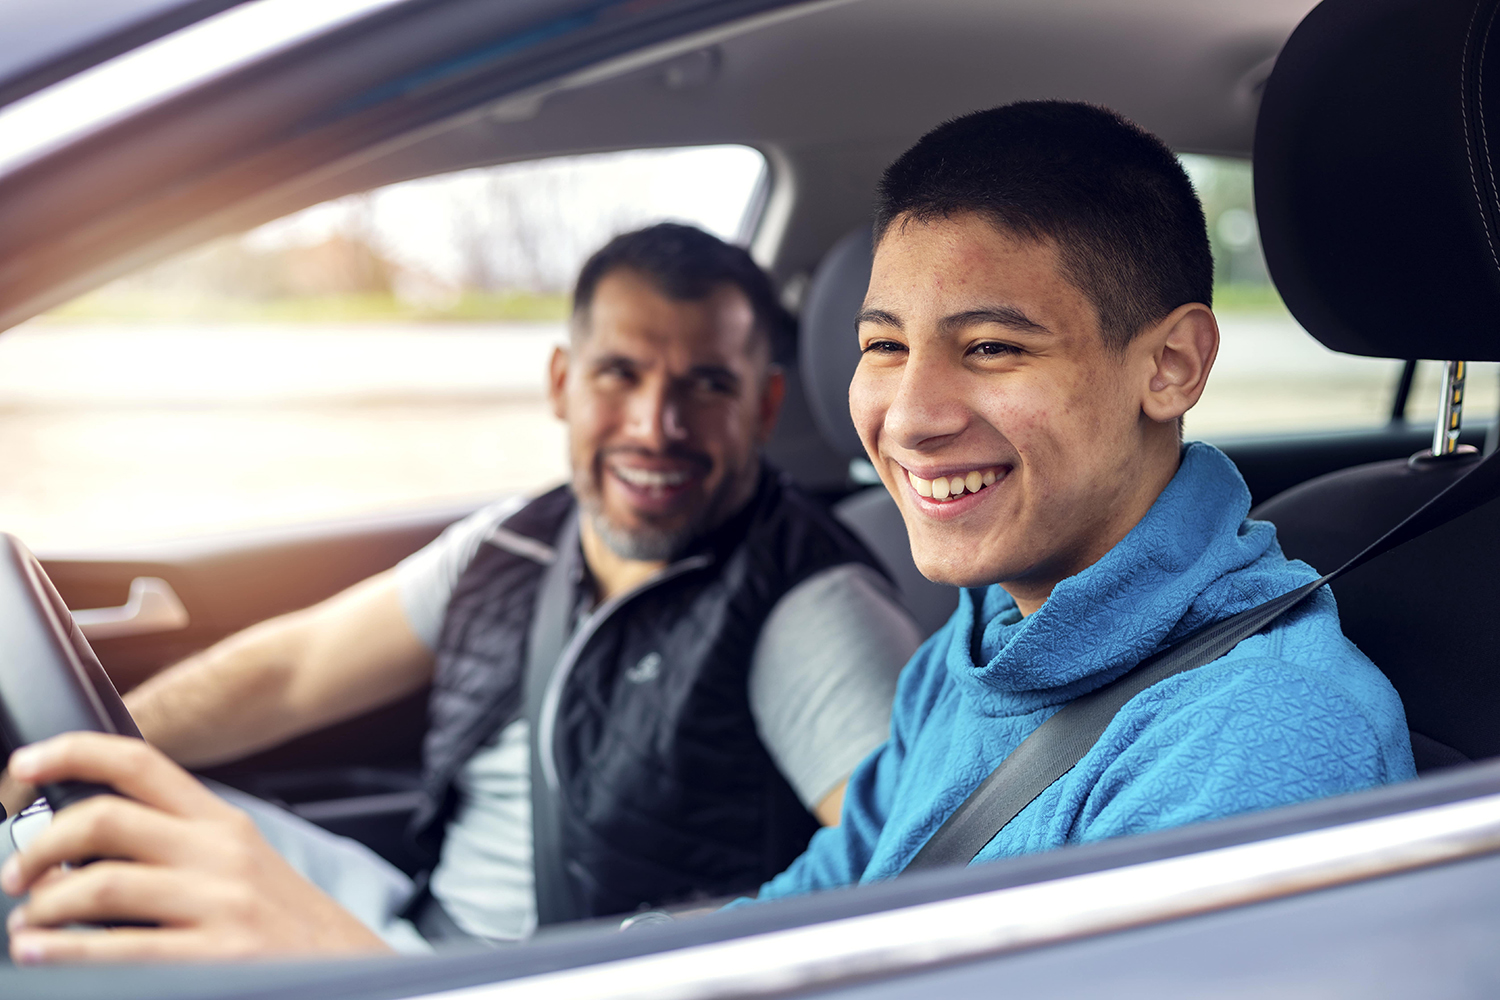 Teen Driver Resources: Insurance, Safety &#038; Tips